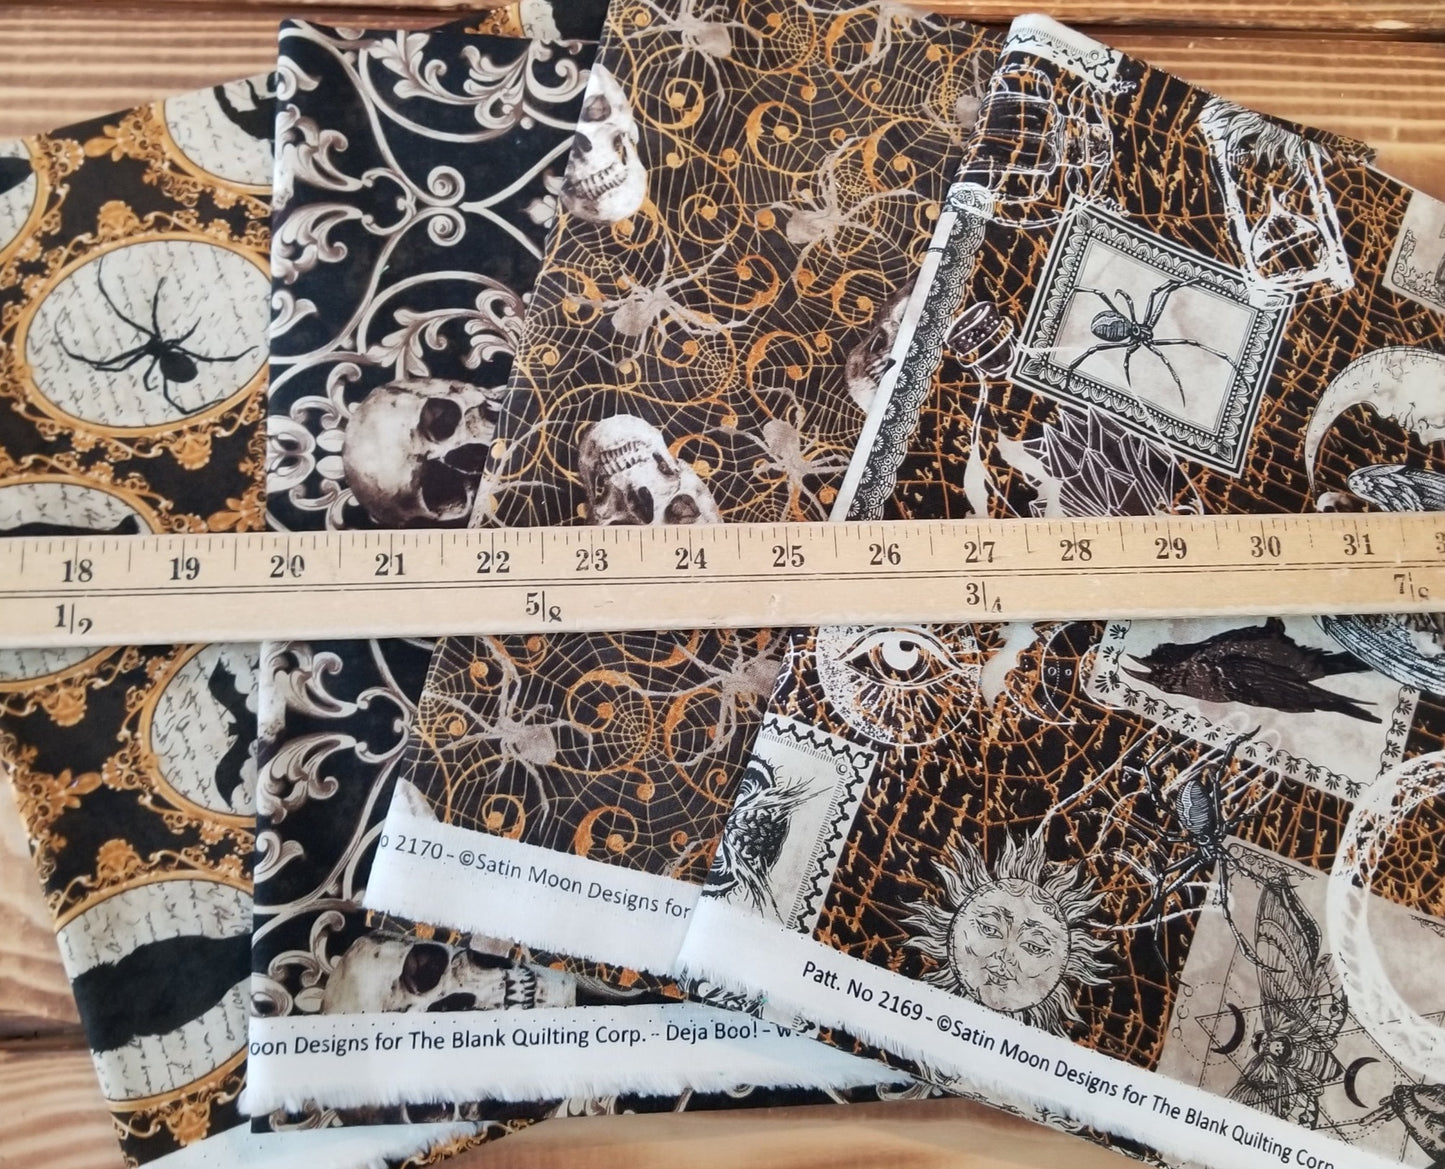 End of Bolt 4 yard case pack: 4 pieces of Quilting Cottons Blank Quilting Halloween Deja Boo! (1 yard cuts)- As pictured